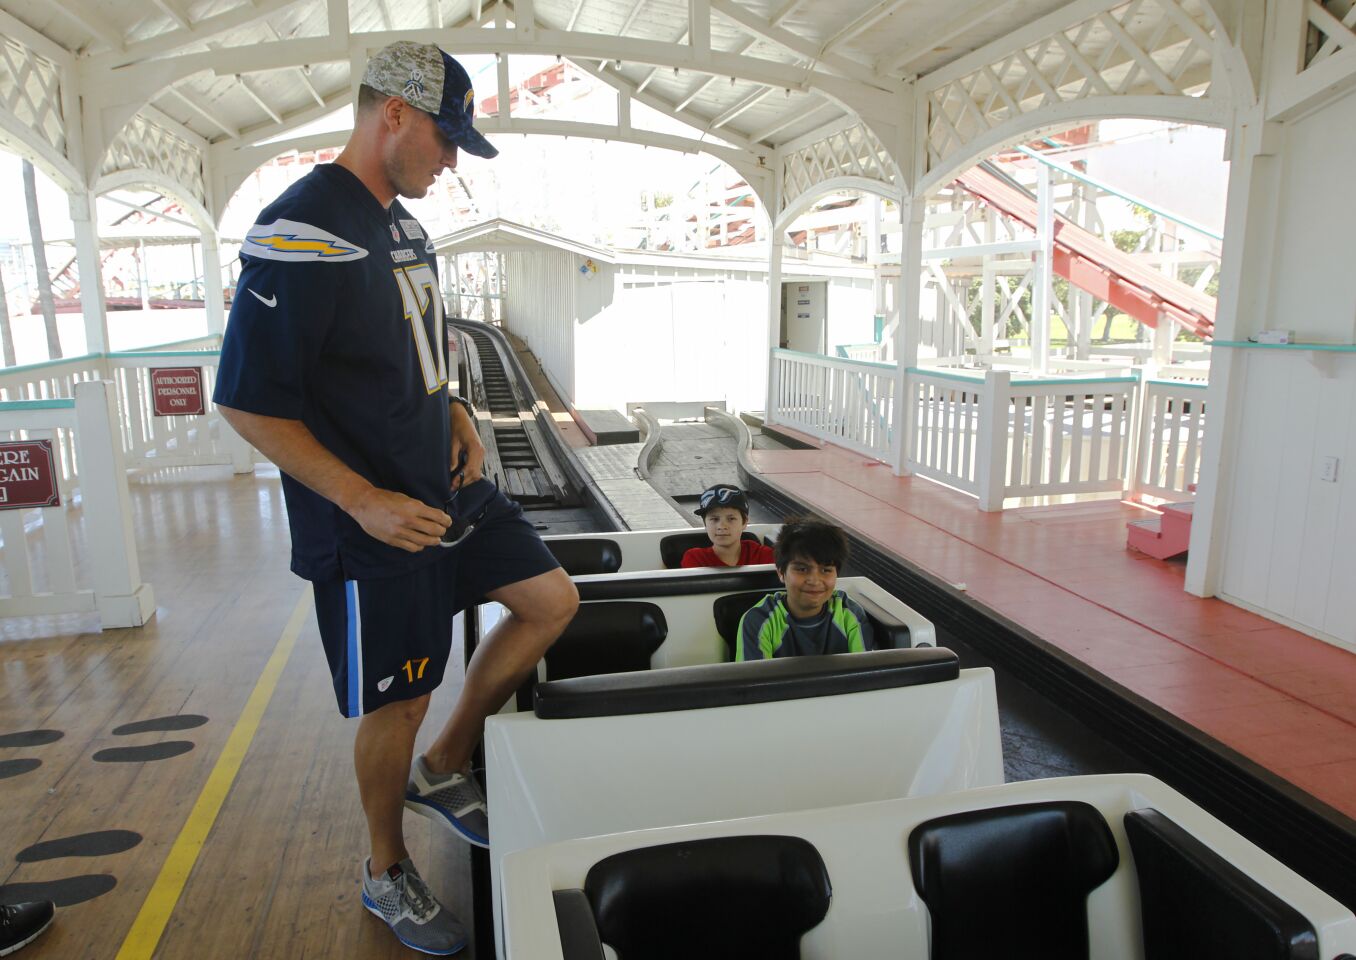 San Diego Chargers quarterback Philip Rivers prepares to ride the Giant Dipper roller coaster with fans at Belmont Park in Mission Beach during the Chargers' Thank You San Diego Day on May 25, 2016.